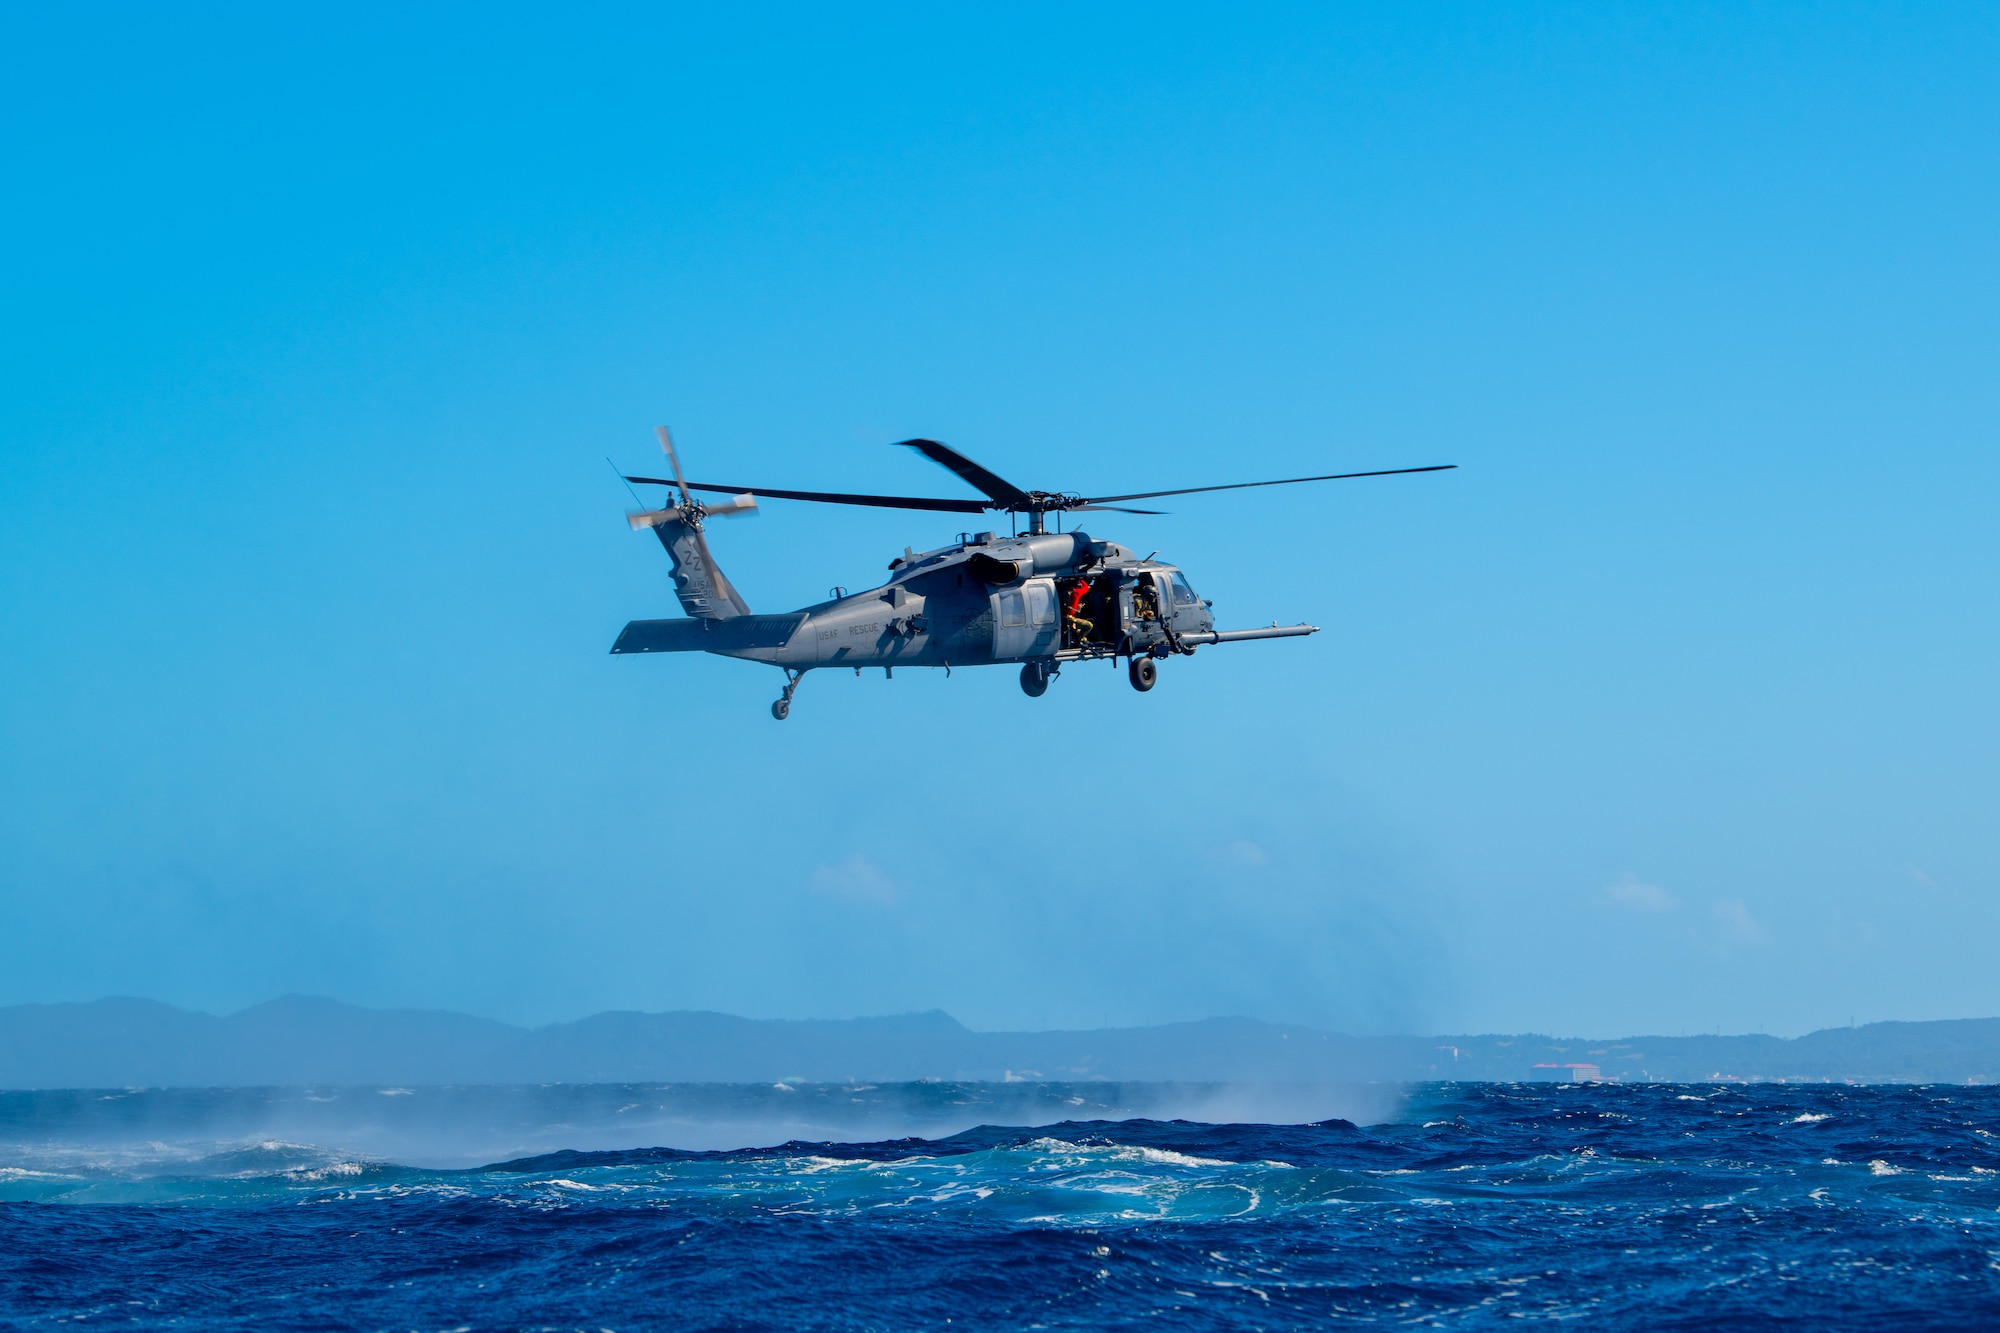 An HH-60G Pave Hawk hovers above the ocean.